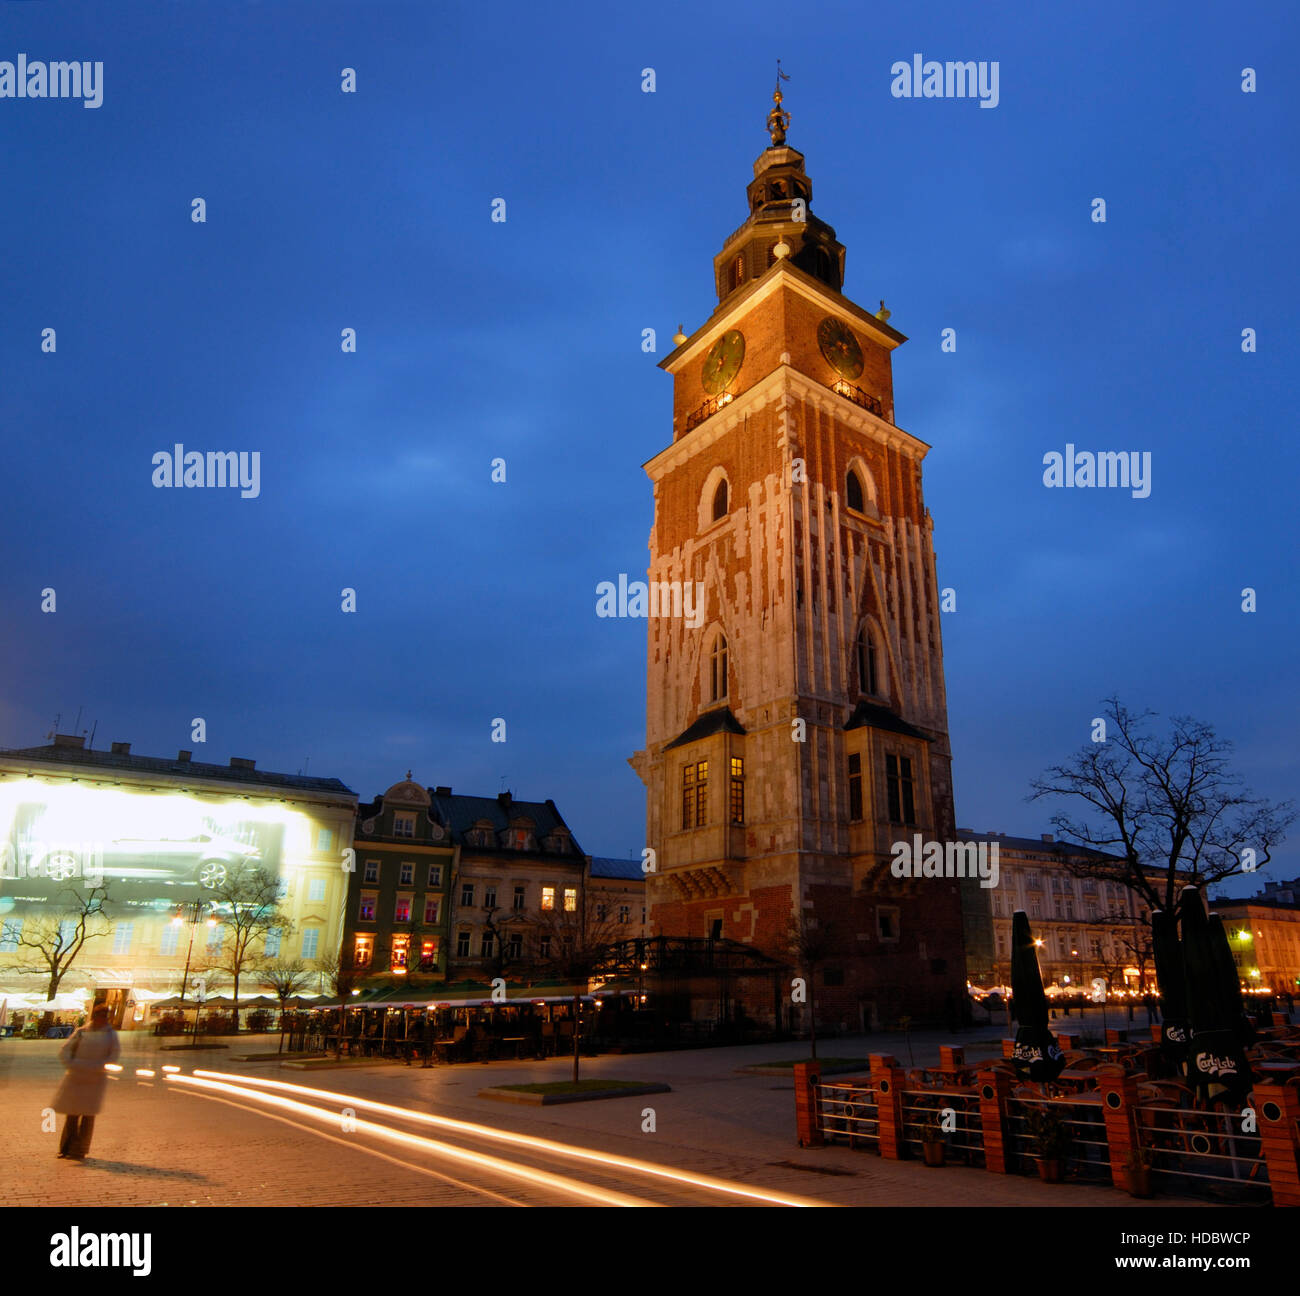 Town hall tower, Ratusz, on the main market square, Rynek Glowny, by night, Krakow, Cracow, Poland, Europe Stock Photo